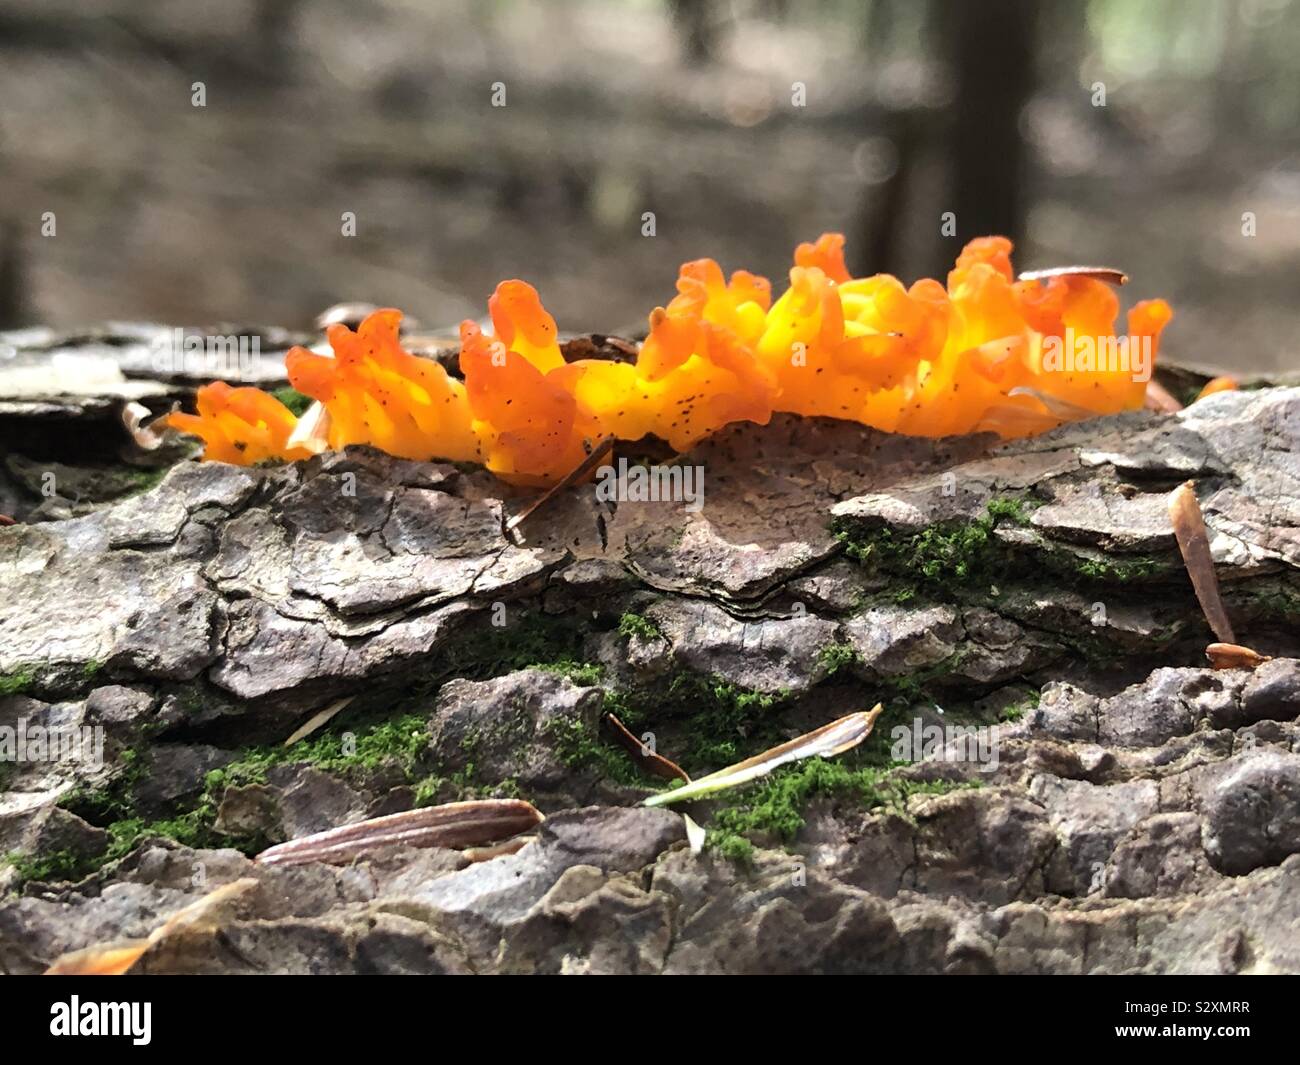 Orange fungus growing on a tree log in the autumn Stock Photo